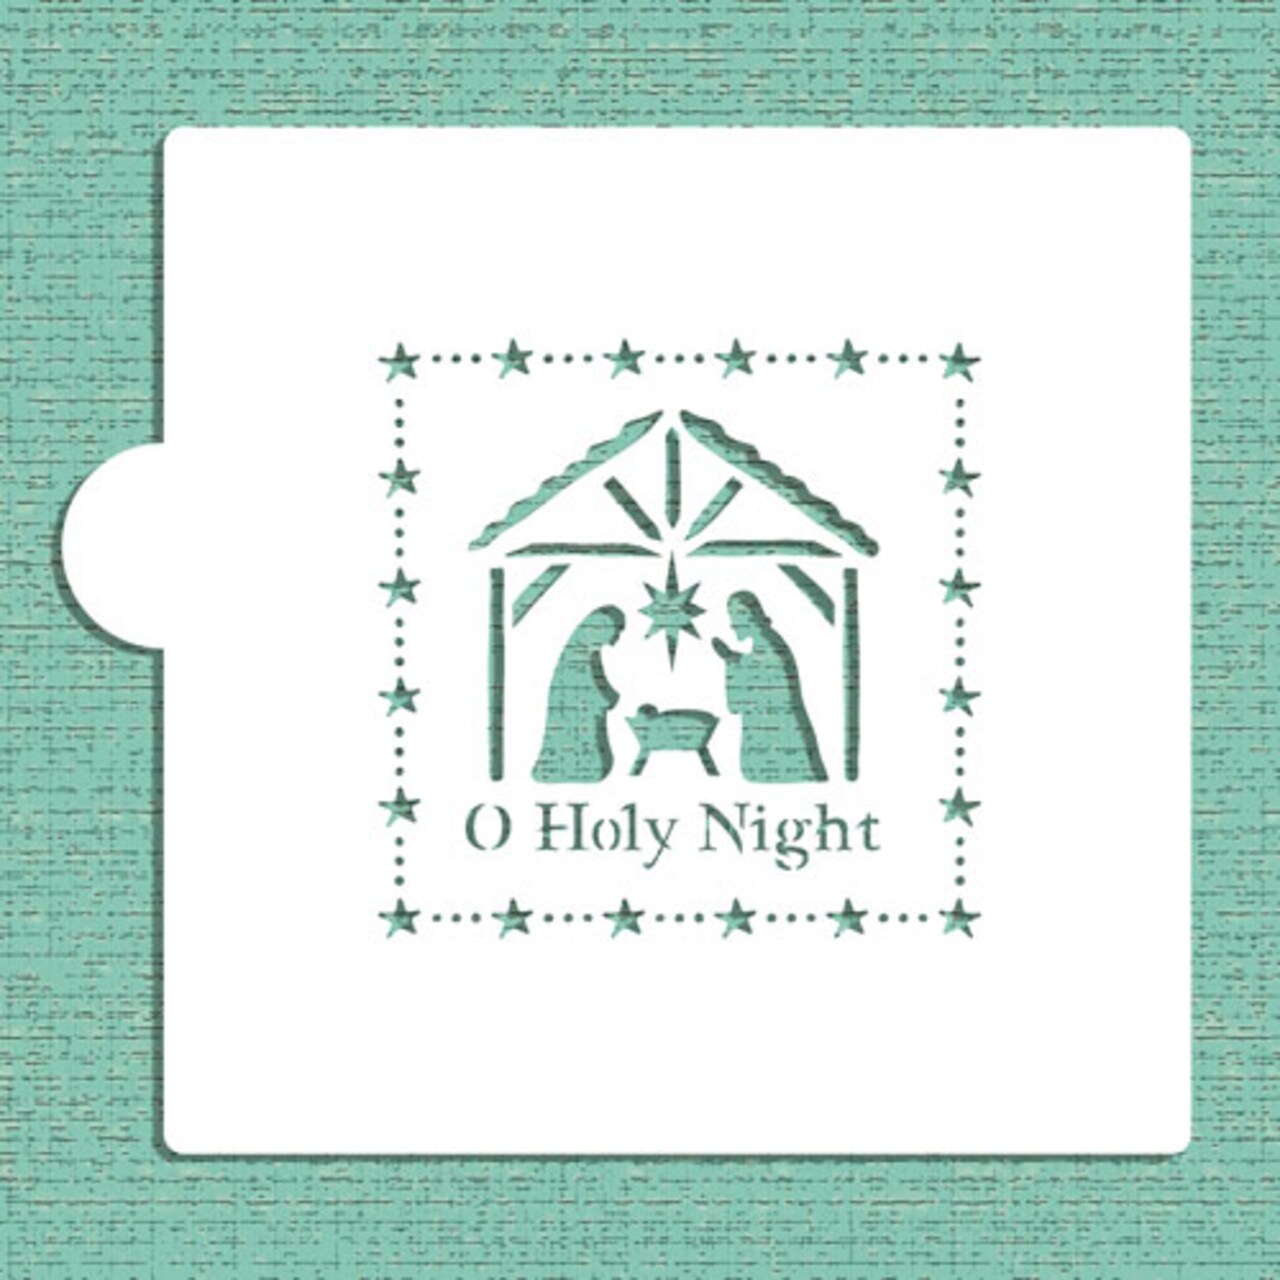 O Holy Night Nativity Scene Cookie &#x26; Craft Stencil | CM034 by Designer Stencils | Cookie Decorating Tools | Baking Stencils for Royal Icing, Airbrush, Dusting Powder | Craft Stencils for Canvas, Paper, Wood | Reusable Food Grade Stencil